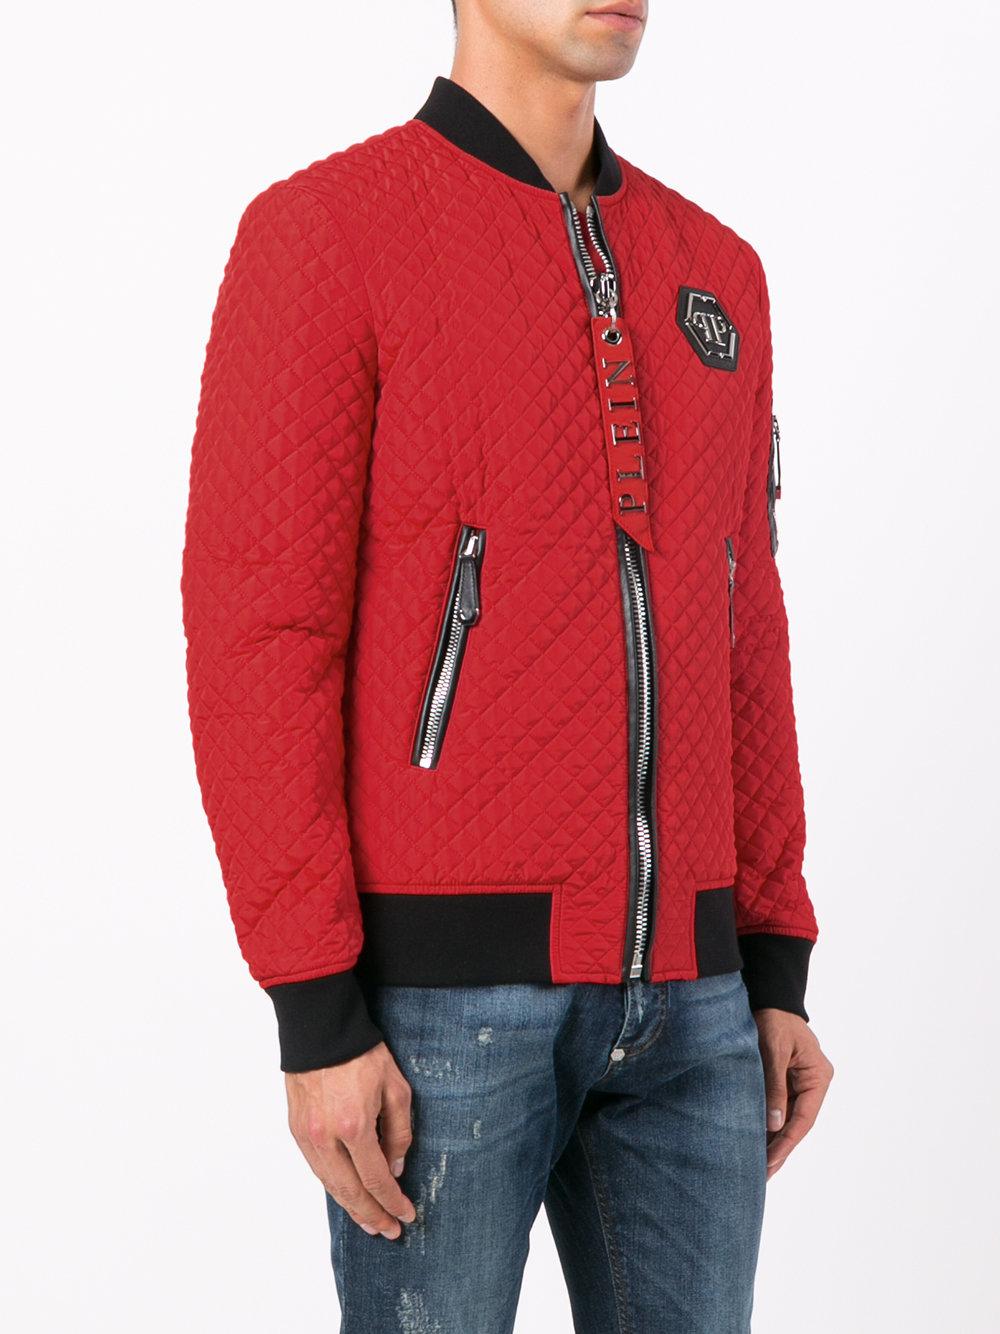 Philipp Plein Synthetic Okyo Bomber Jacket in Red for Men - Lyst